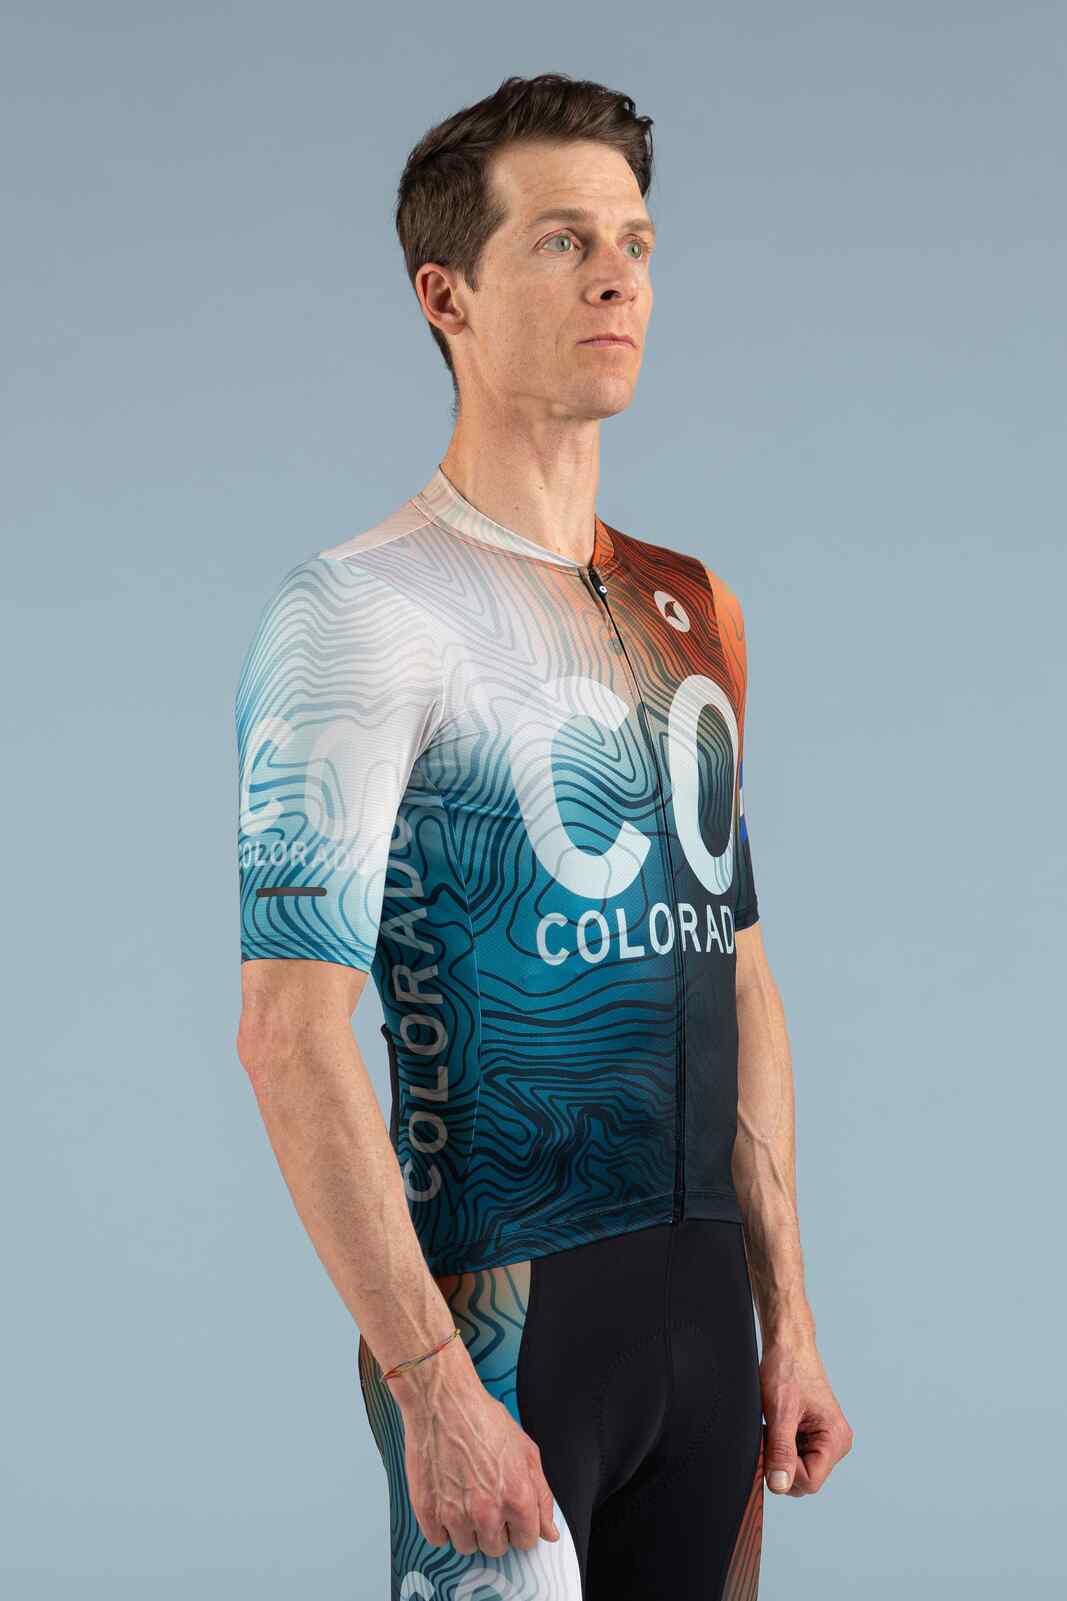 Men's Colorado Geo Cycling Jersey - Ascent Aero Front View